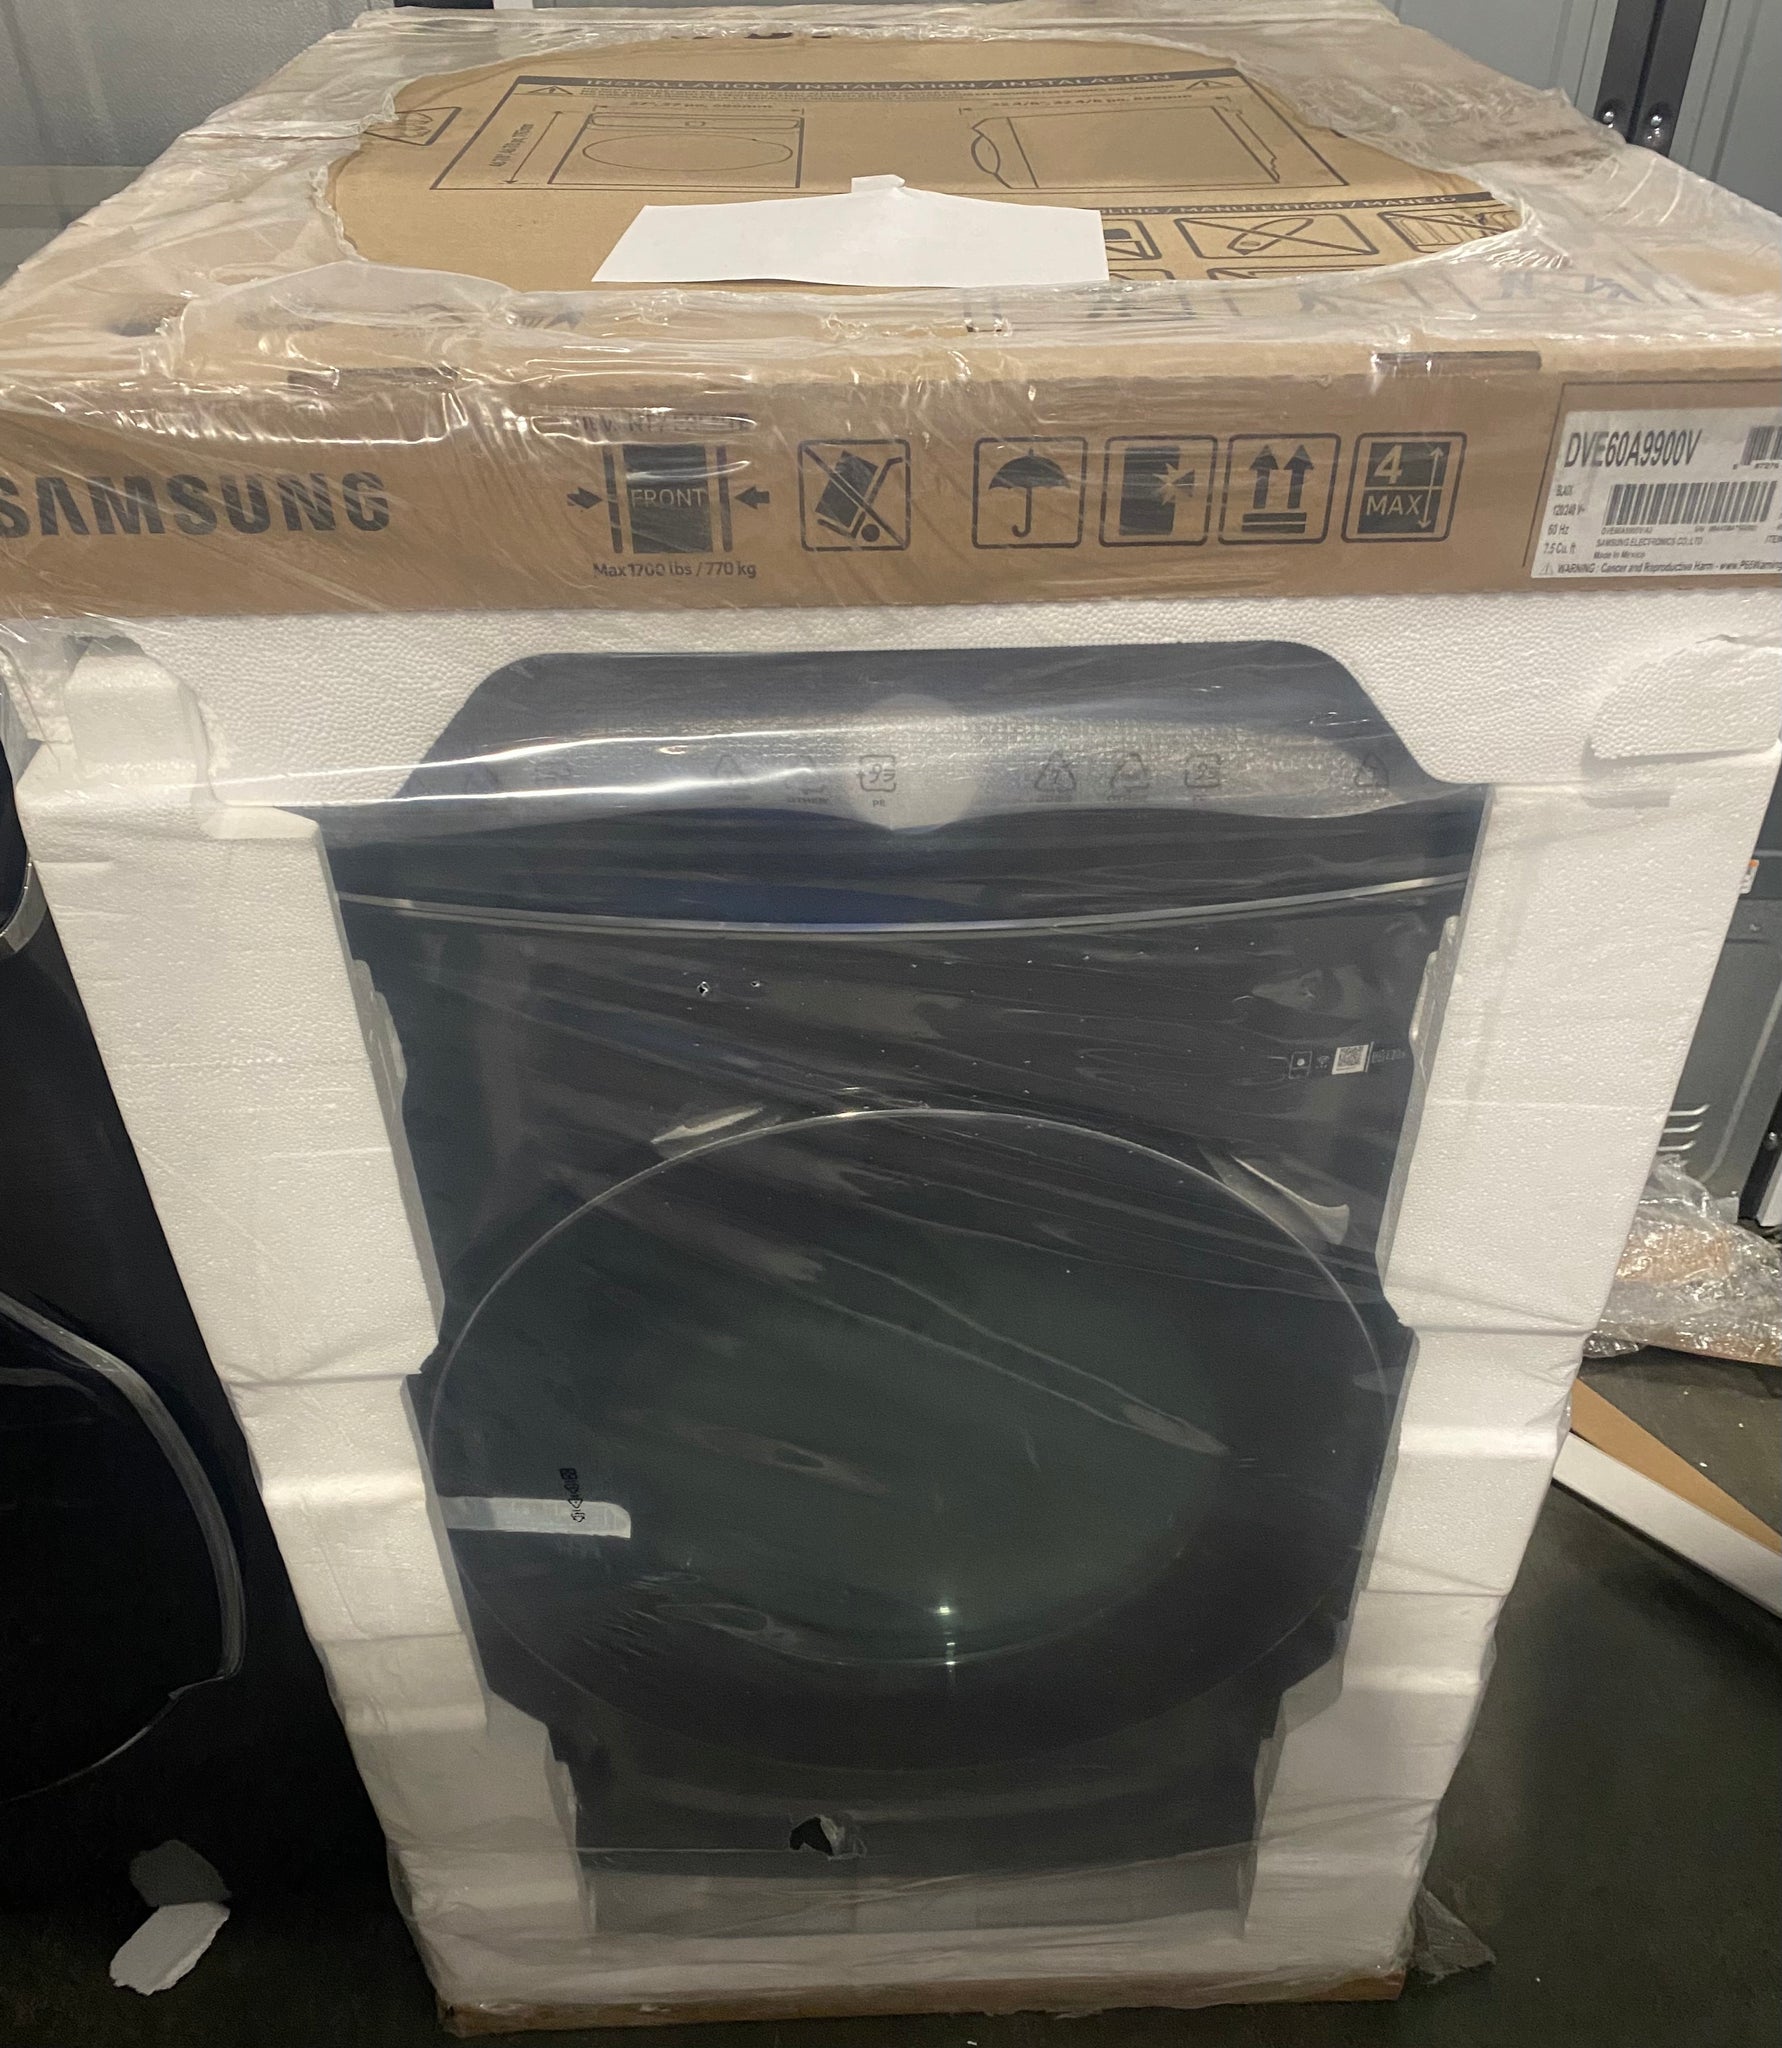 Samsung DVE60A9900V Washing Machine - Front Load Electric Dryer with Steam Cycle. In stock and ready to be delivered in the St. Louis area.